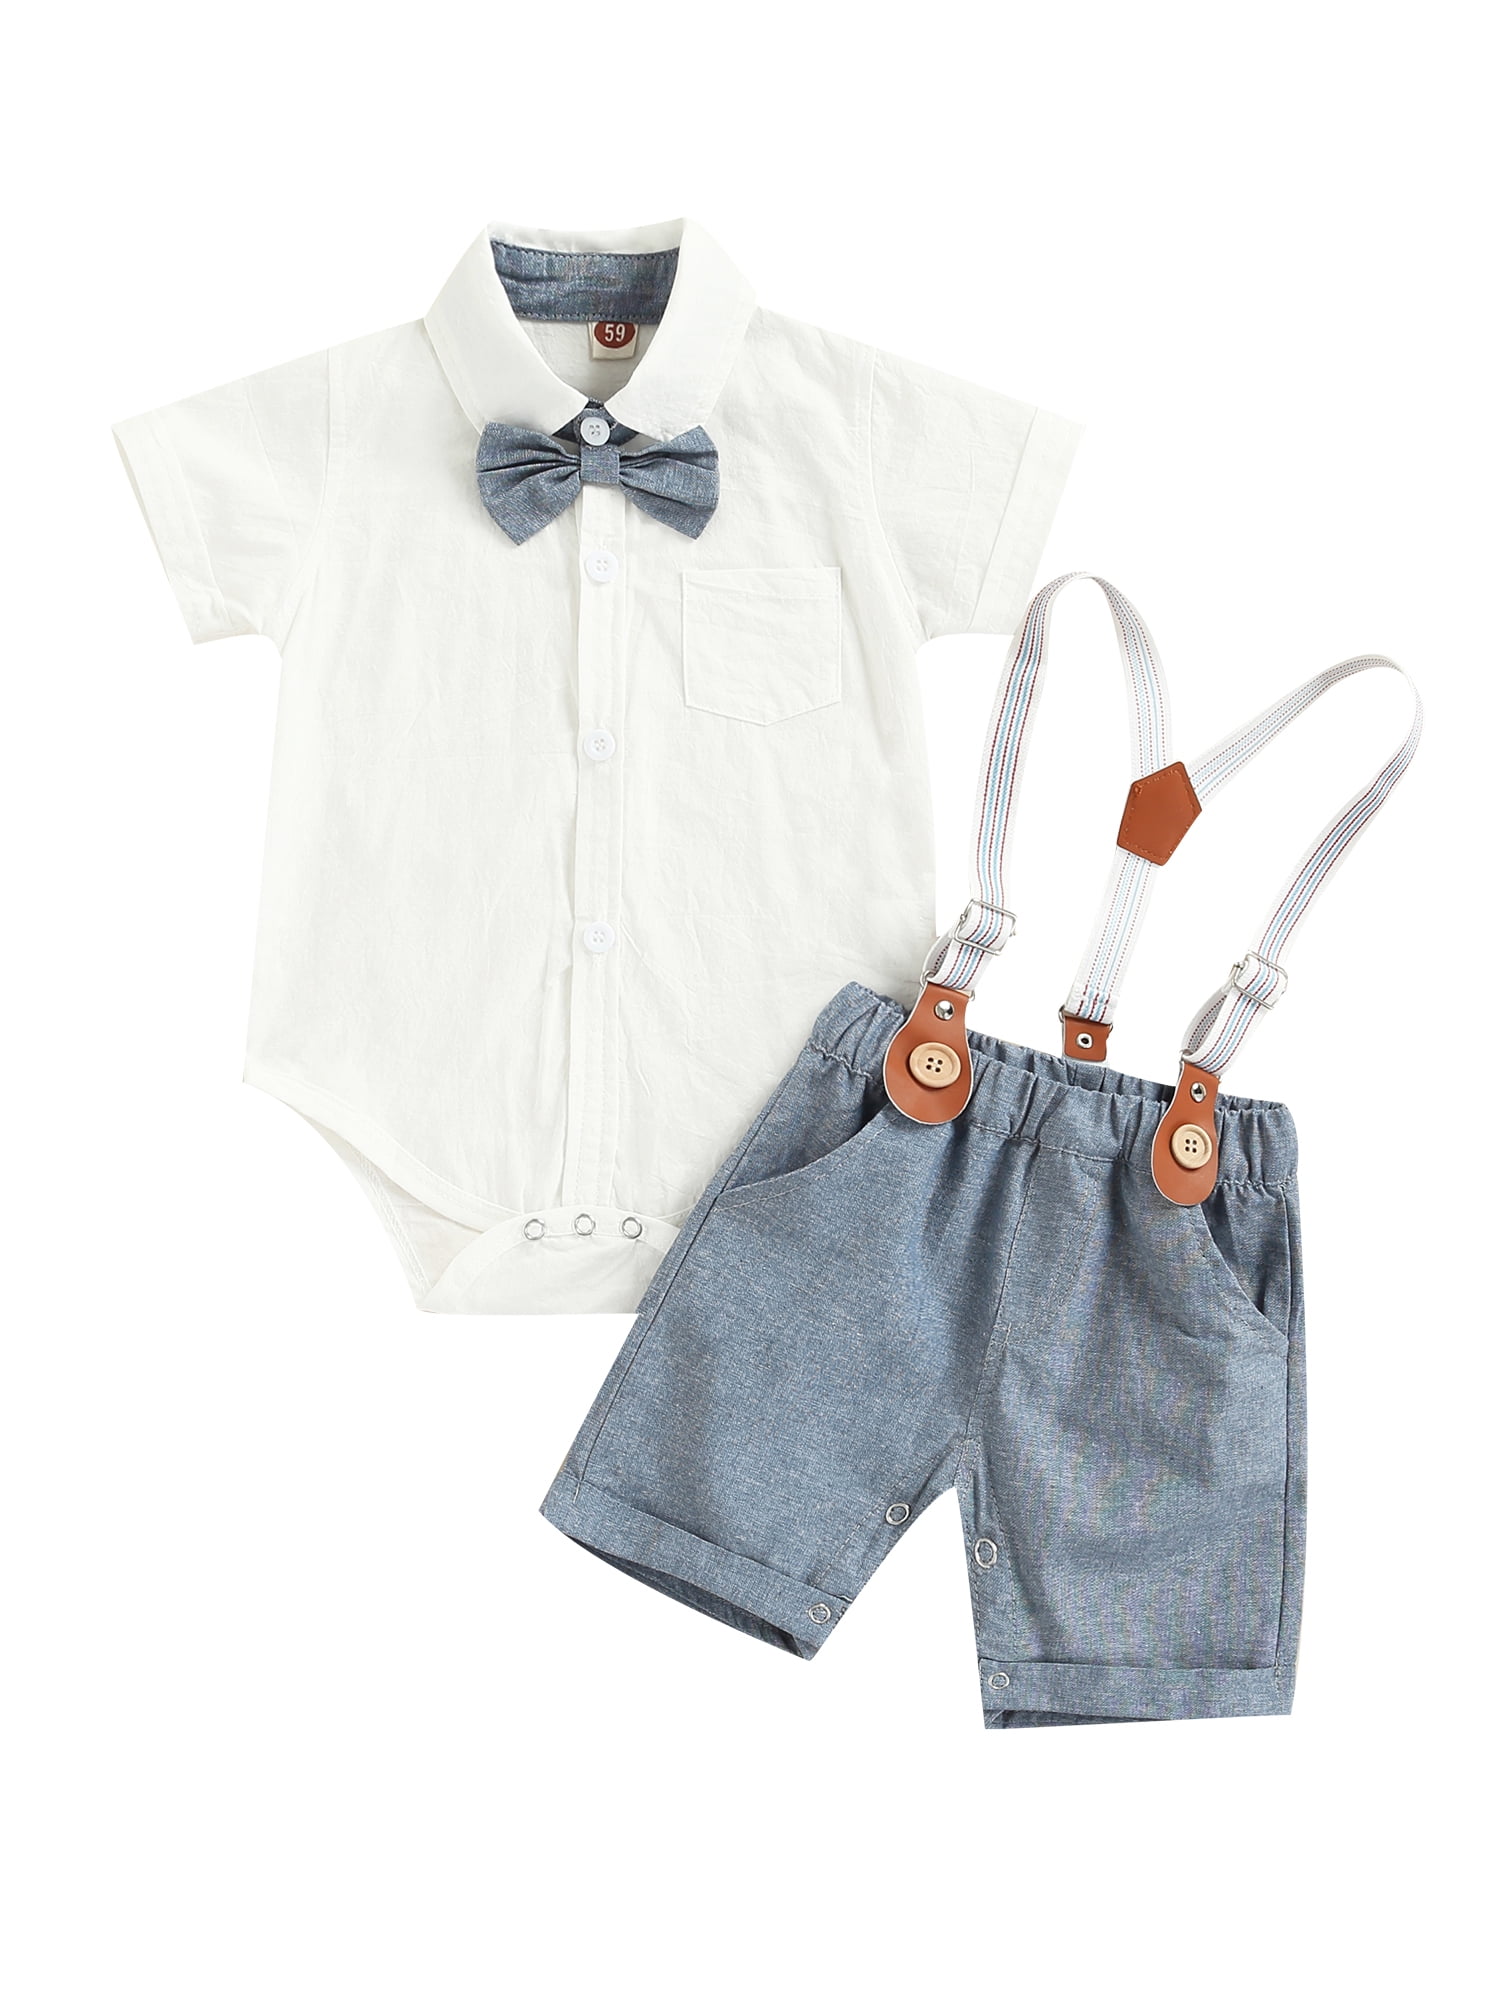 jaweiw Infant Baby Boys Short Sleeve Bowtie Buttons Bodysuit Shirts ...